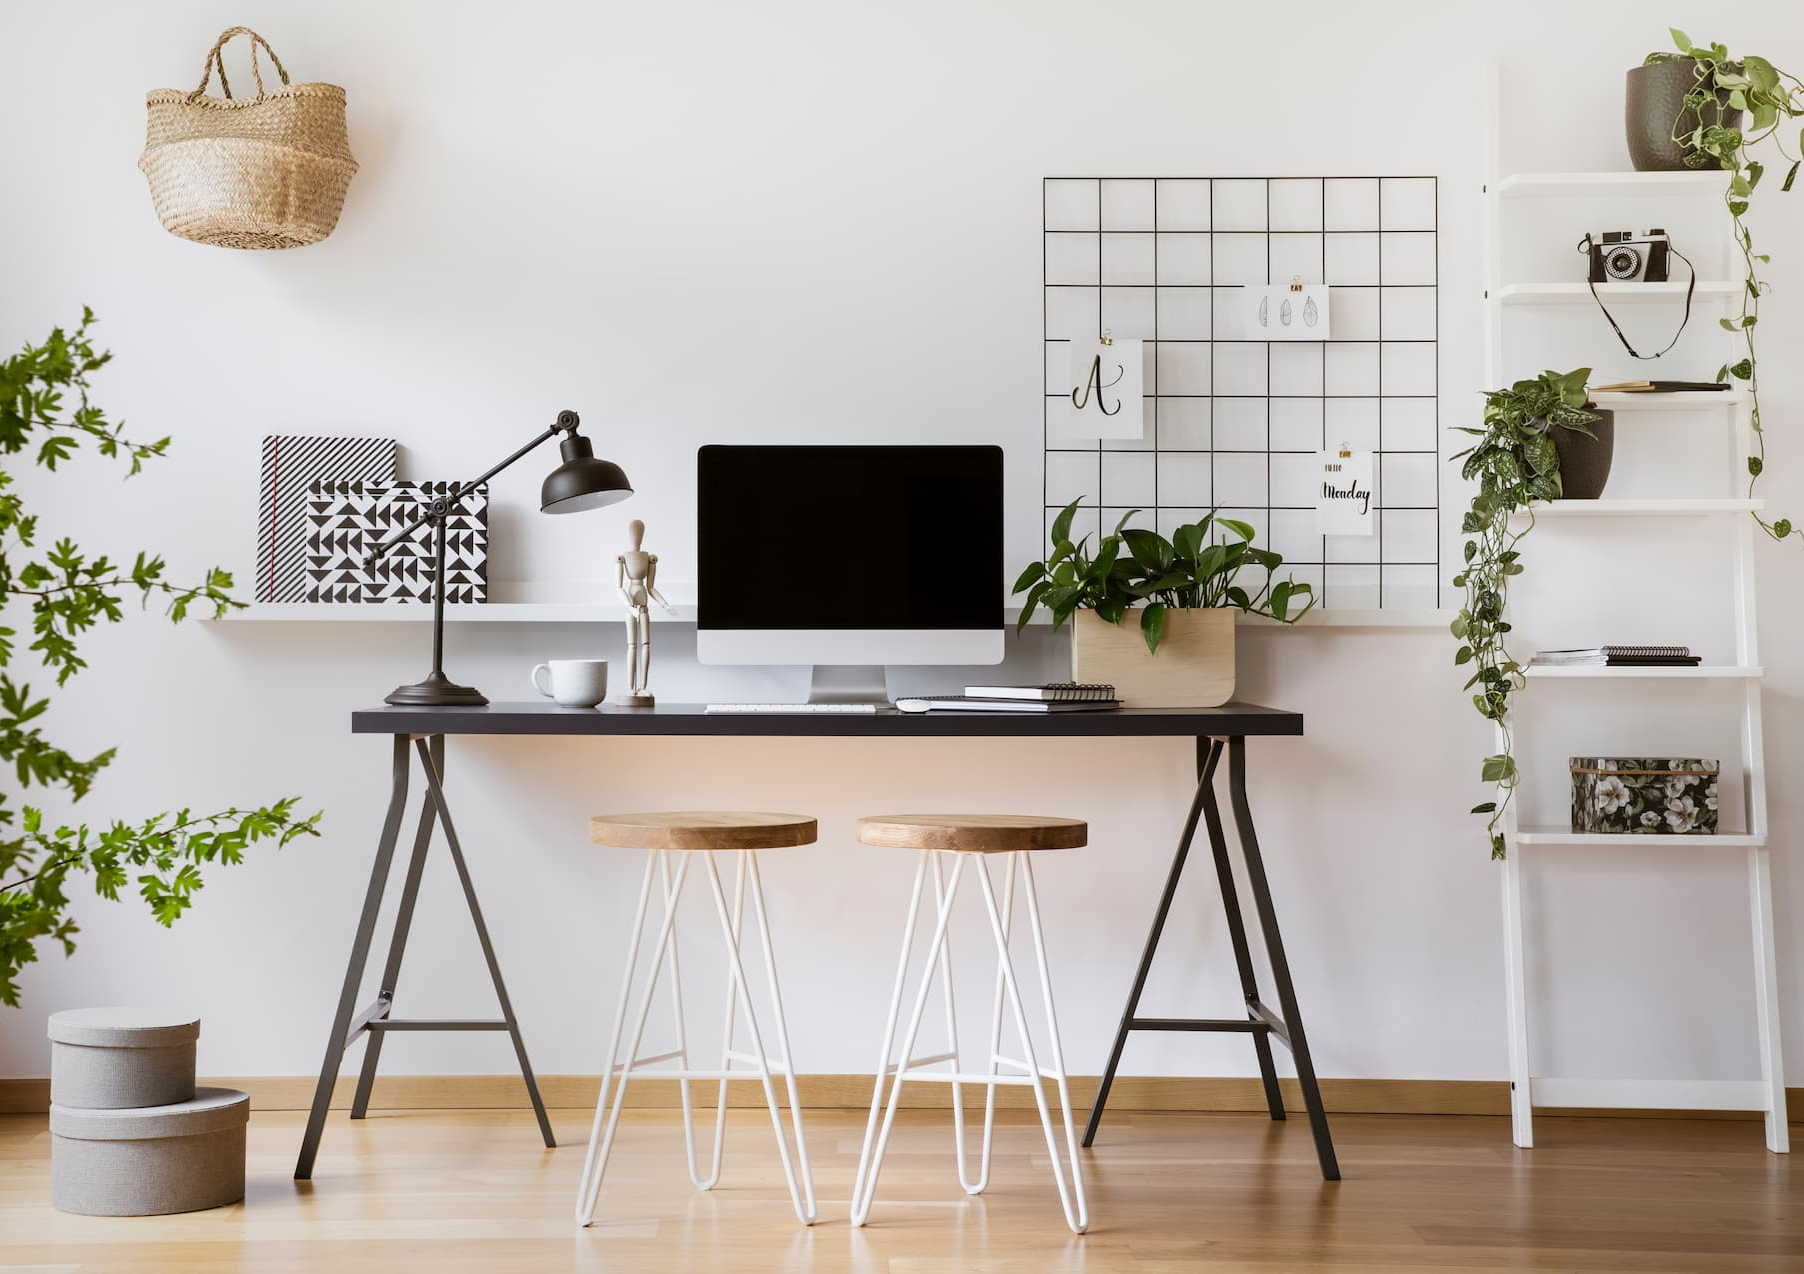 How to Spruce Up Your Home Workspace: Ideas & Tips